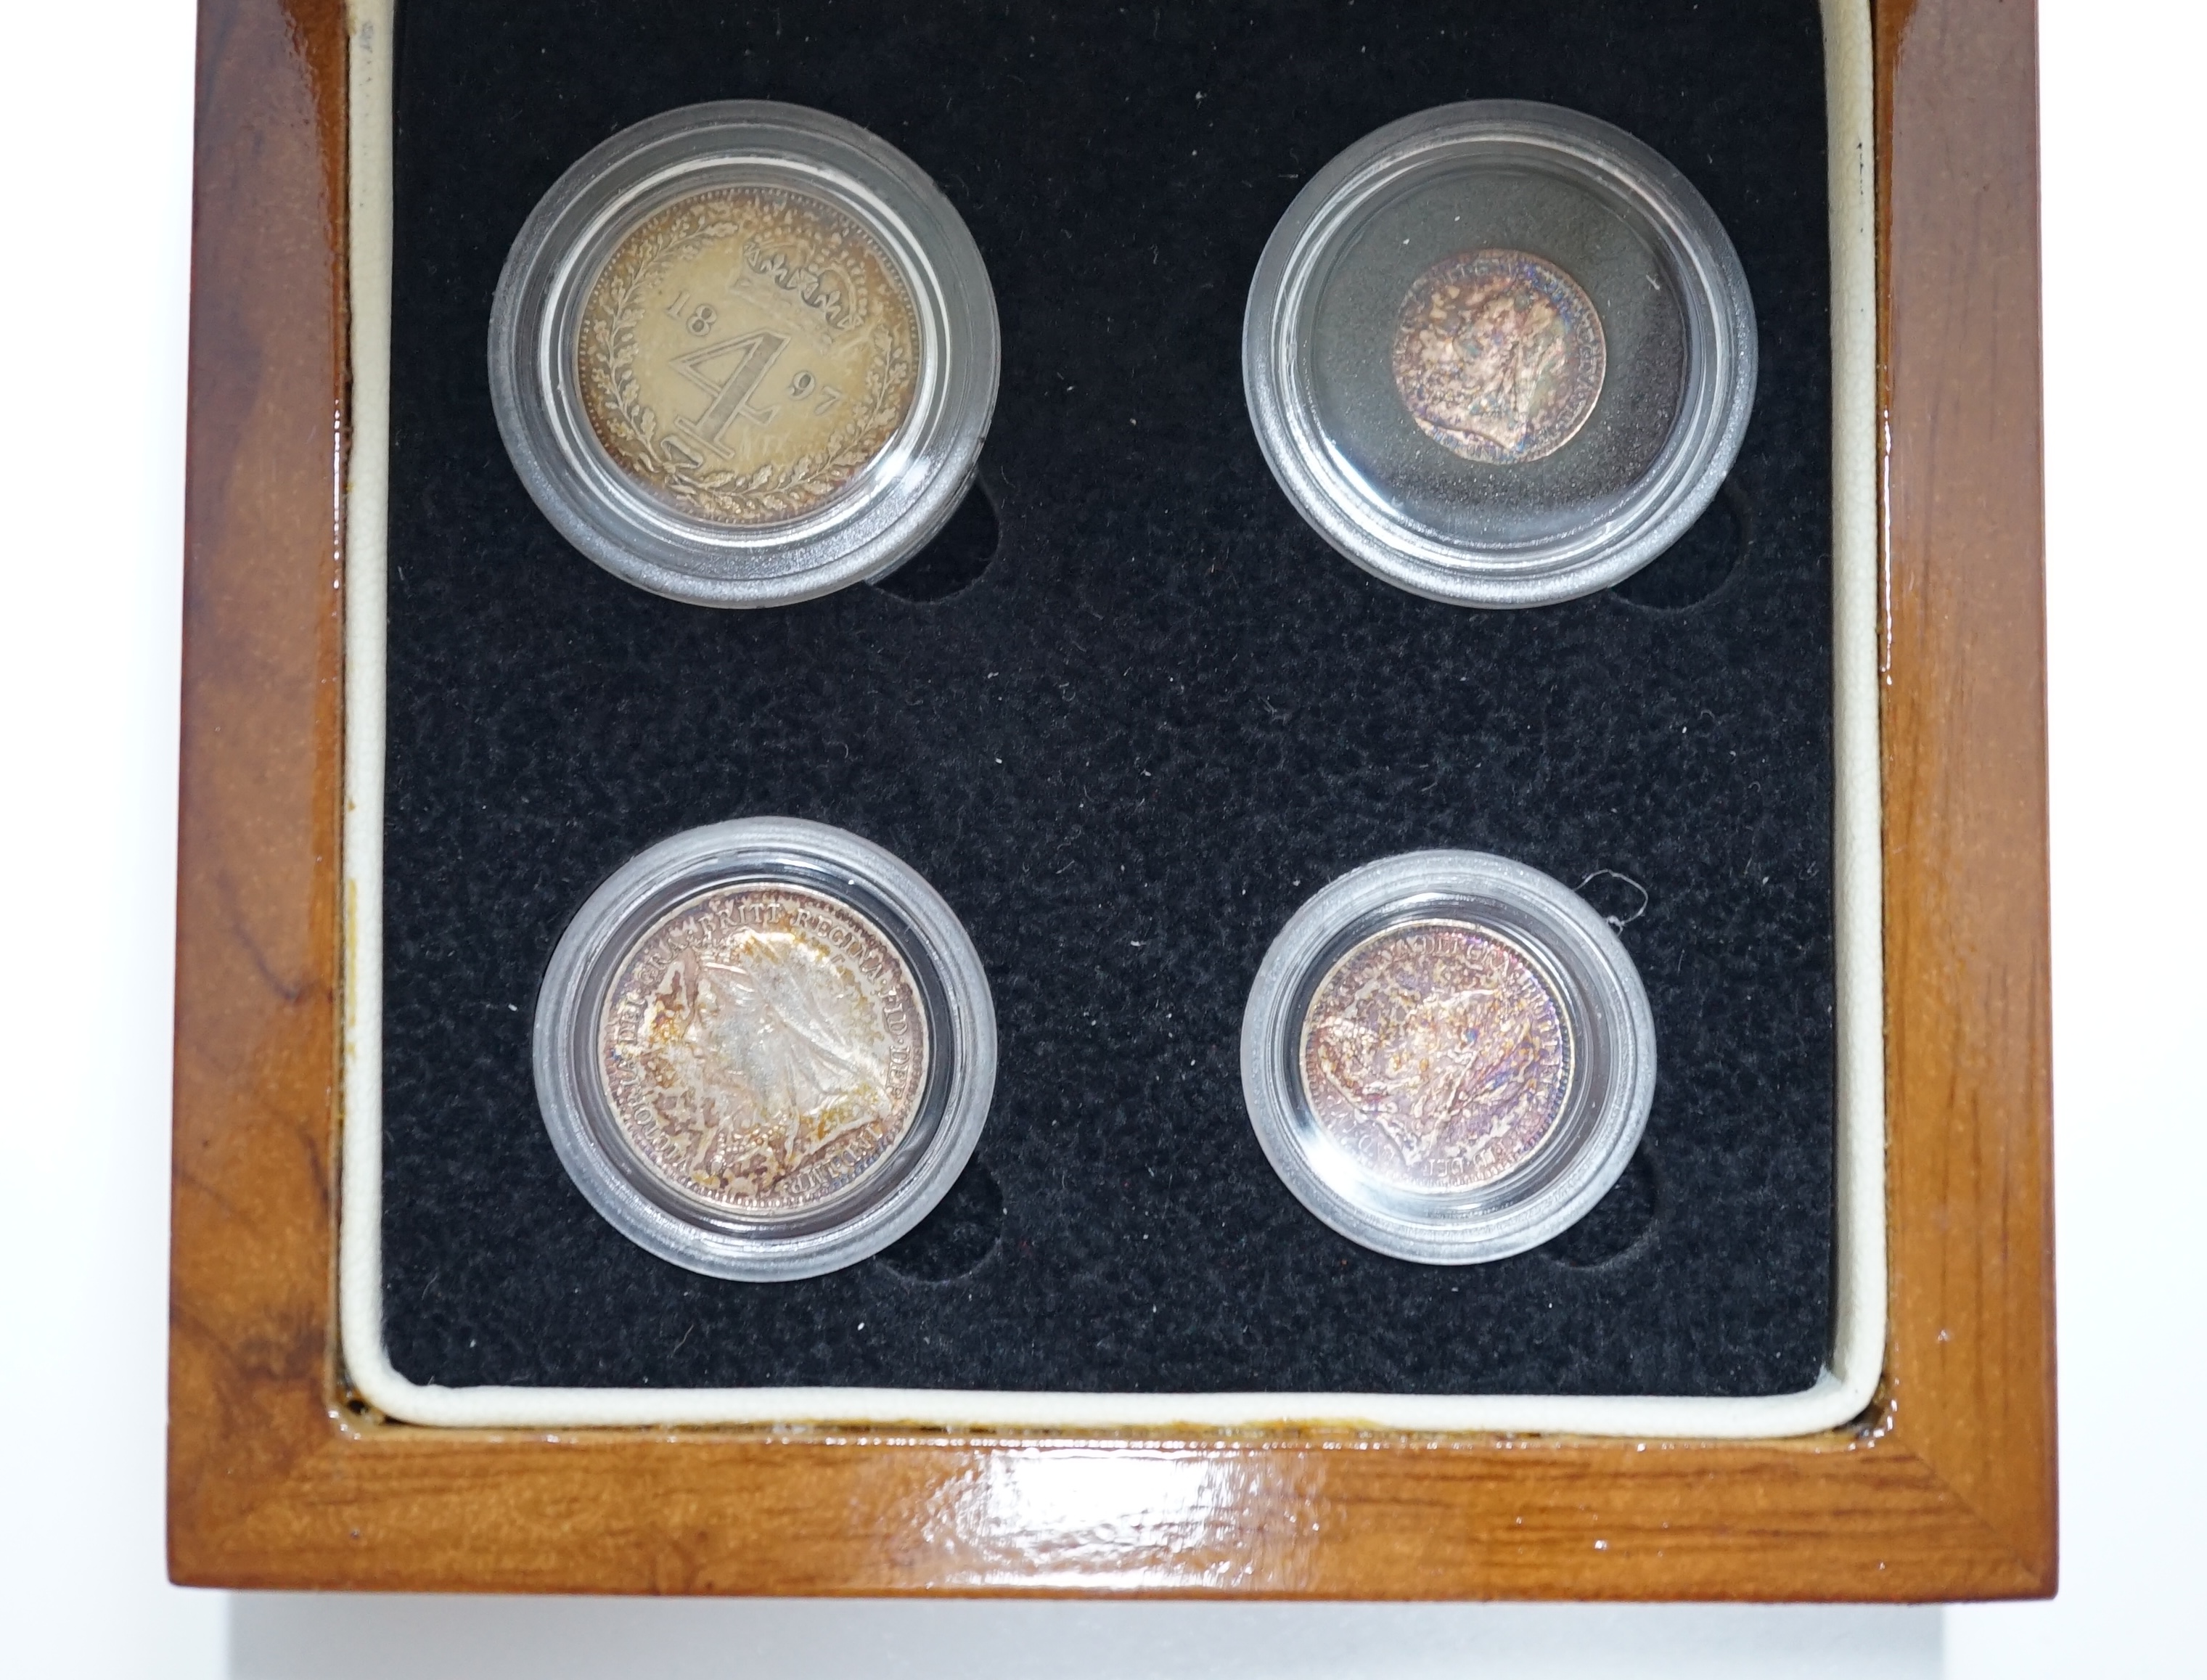 British silver coins, Victoria Veiled portrait four coin set of Maundy coins, 1897, toned UNC, in London Mint case